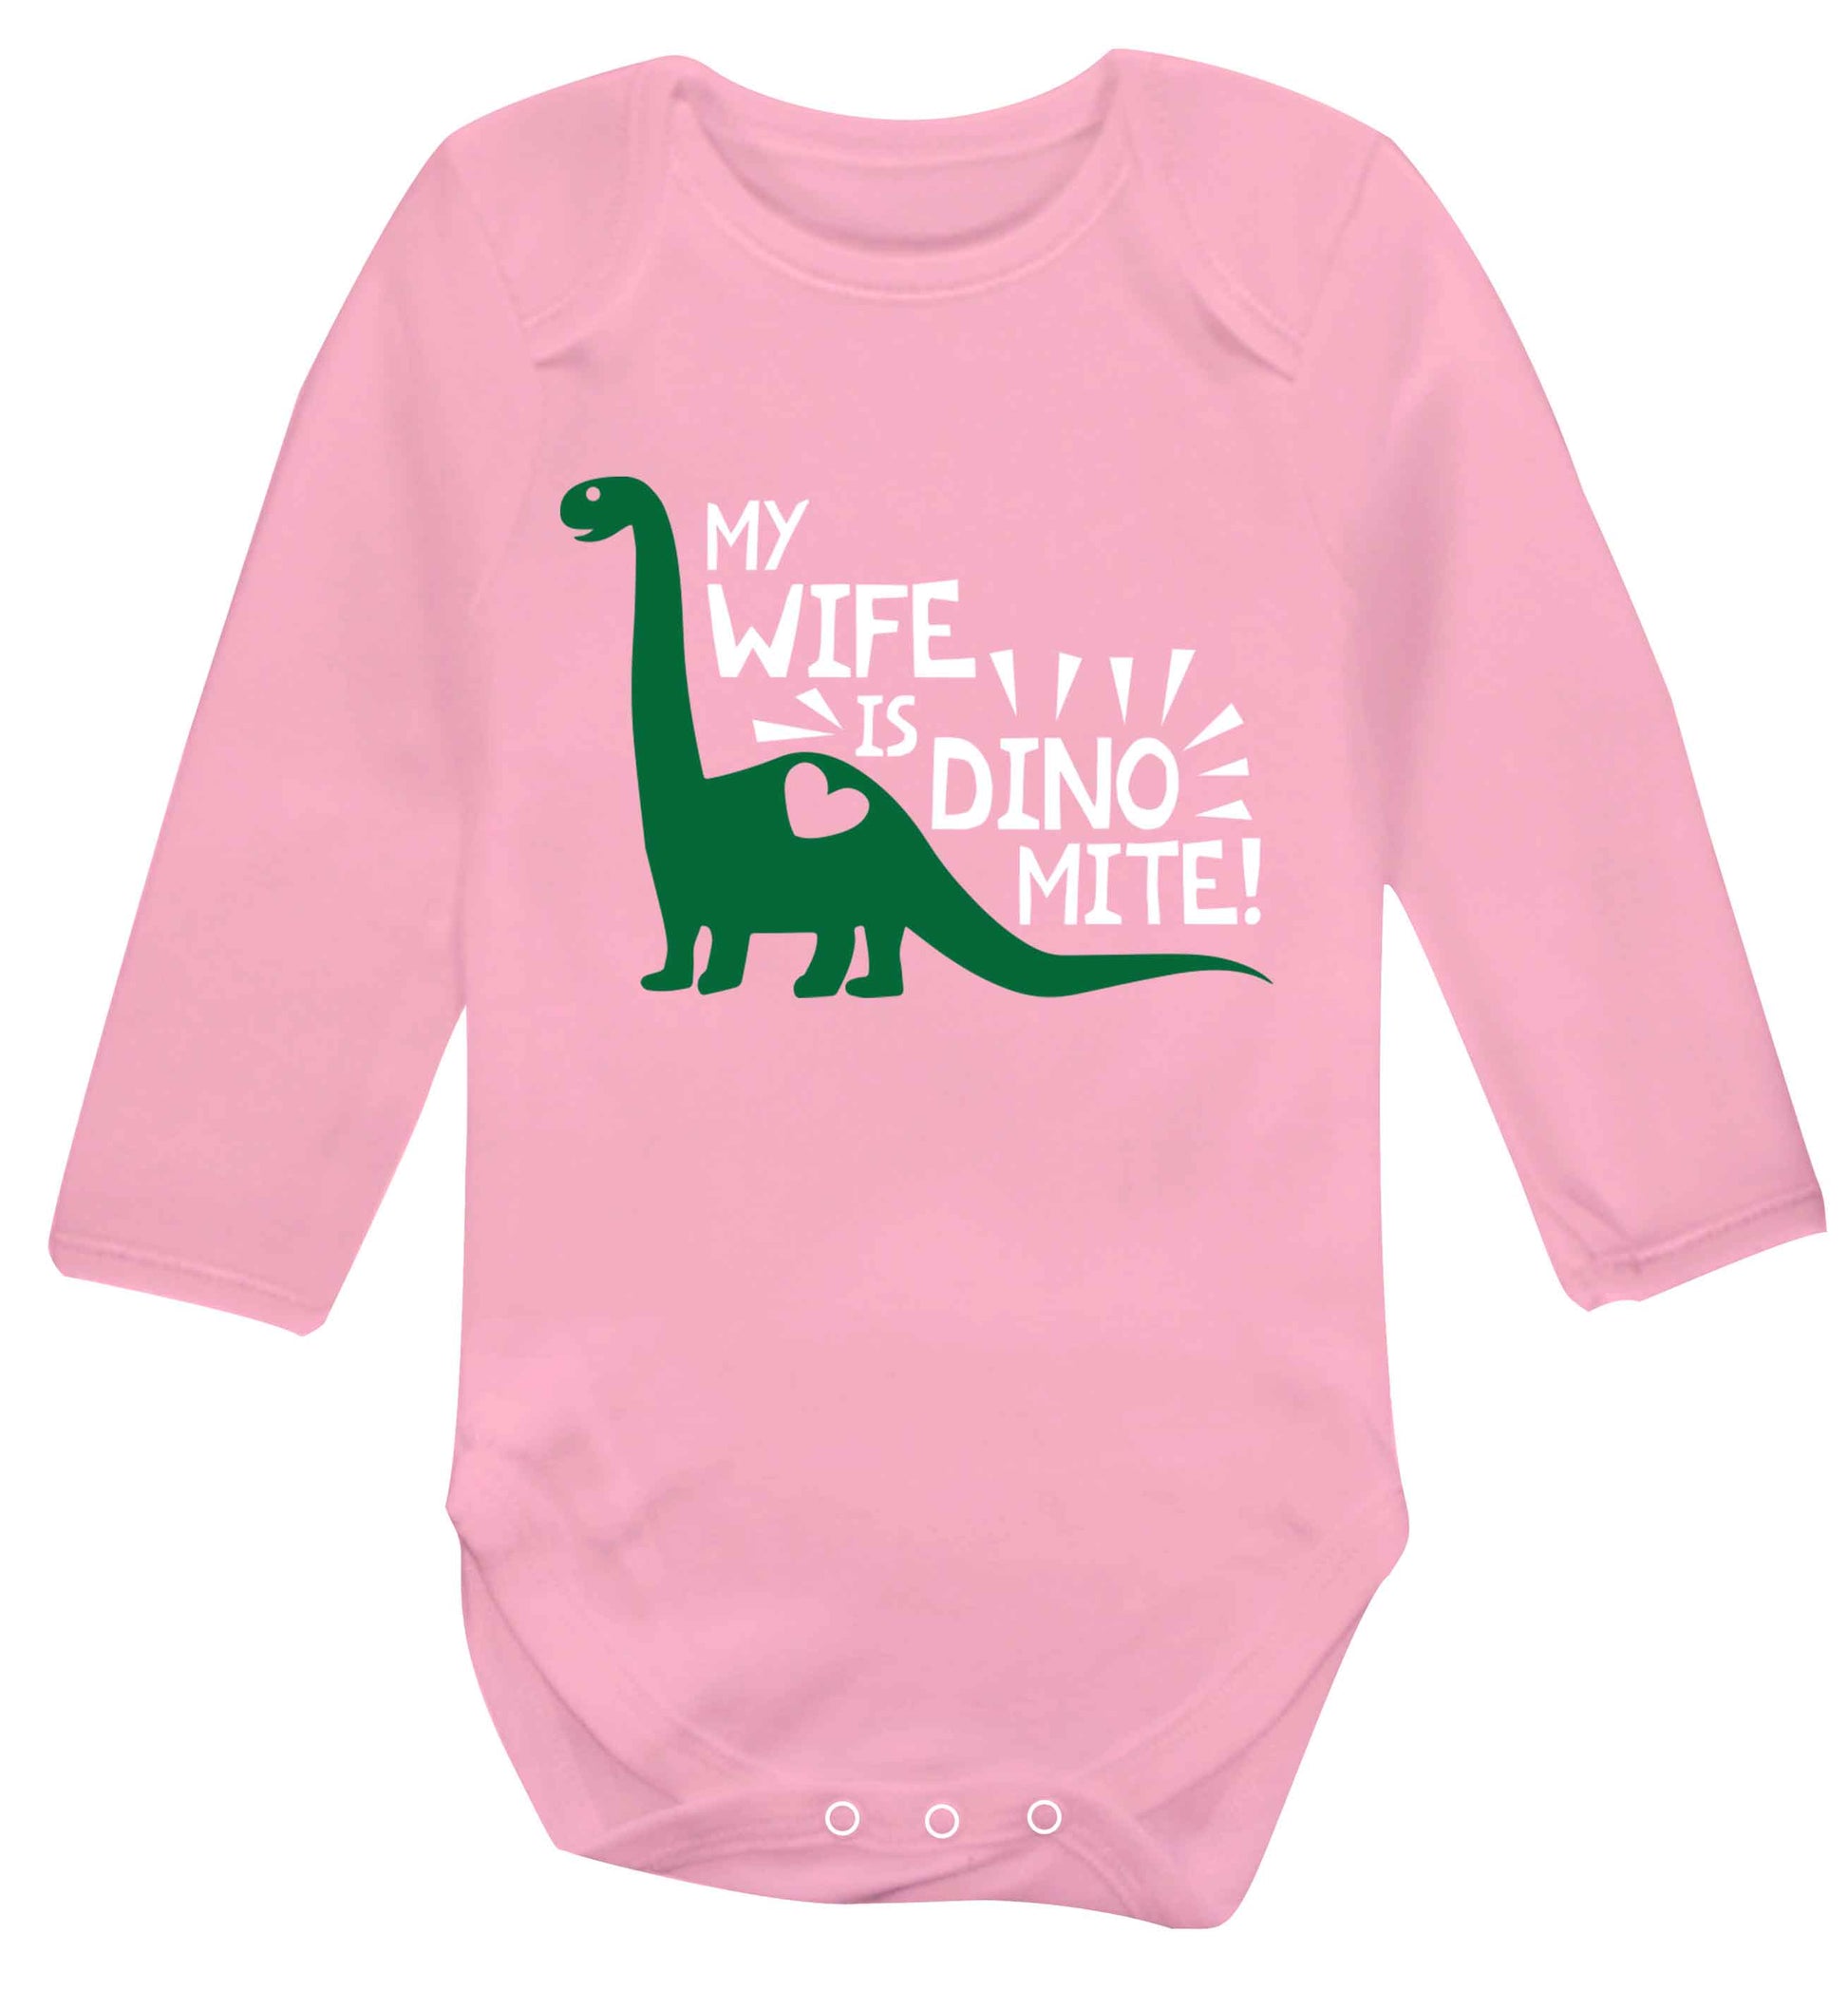 My wife is dinomite! Baby Vest long sleeved pale pink 6-12 months